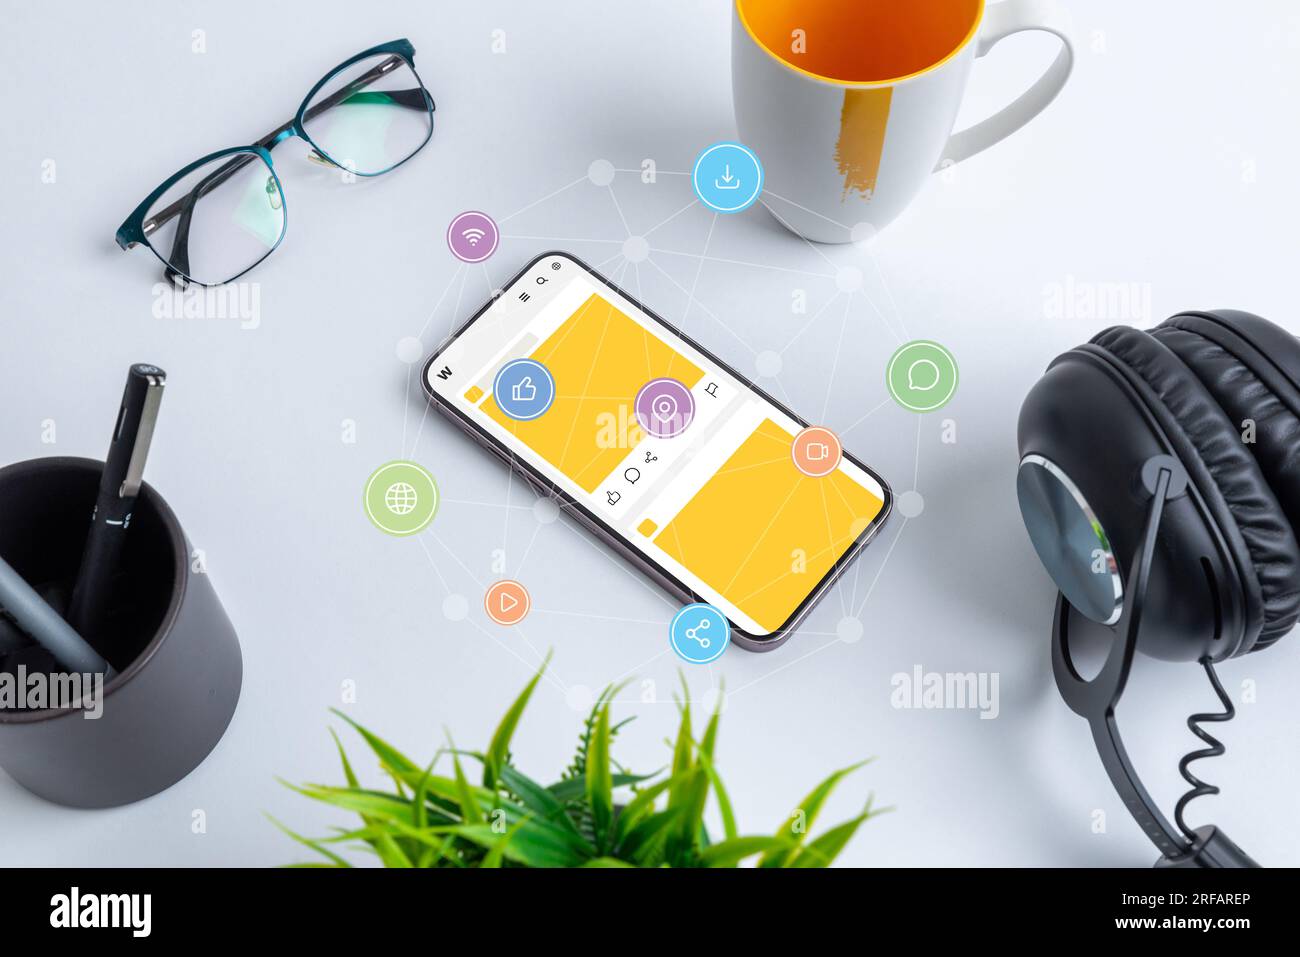 Phone on work desk with social network app and social media icons flying around with network nodes concept Stock Photo